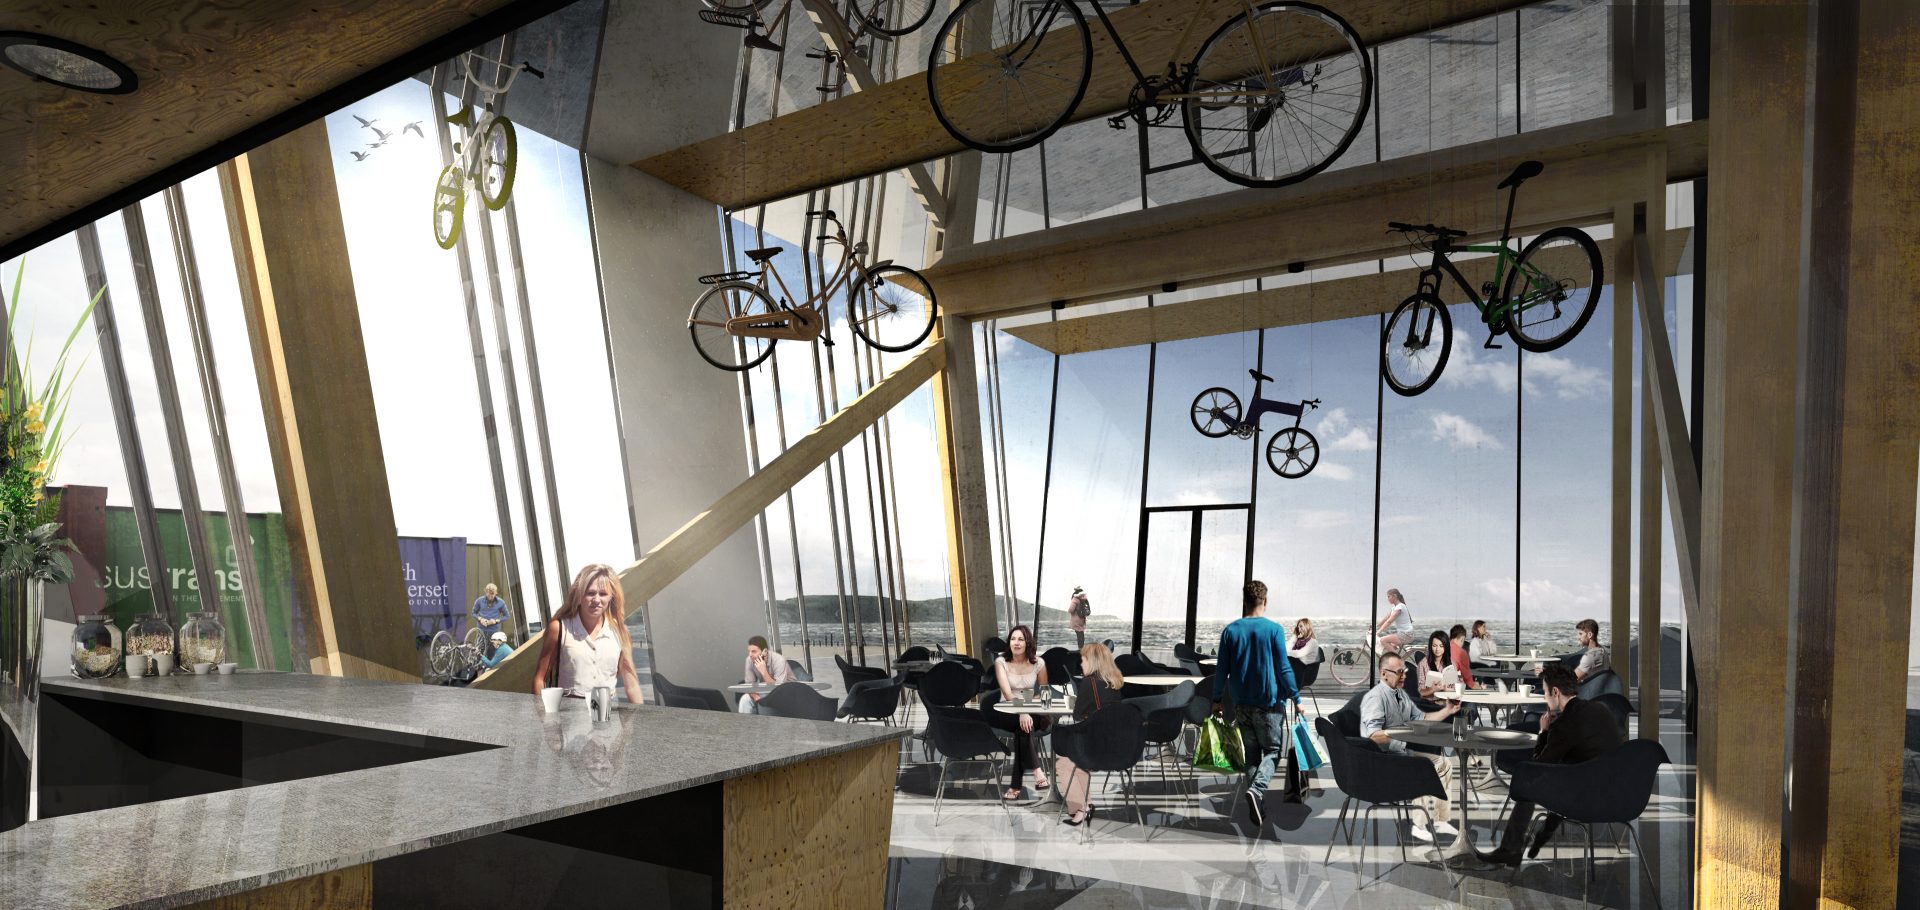 Weston-super-Mare Cycle Activities Centre Bar Cafe Cladding Laminated Timber Frame